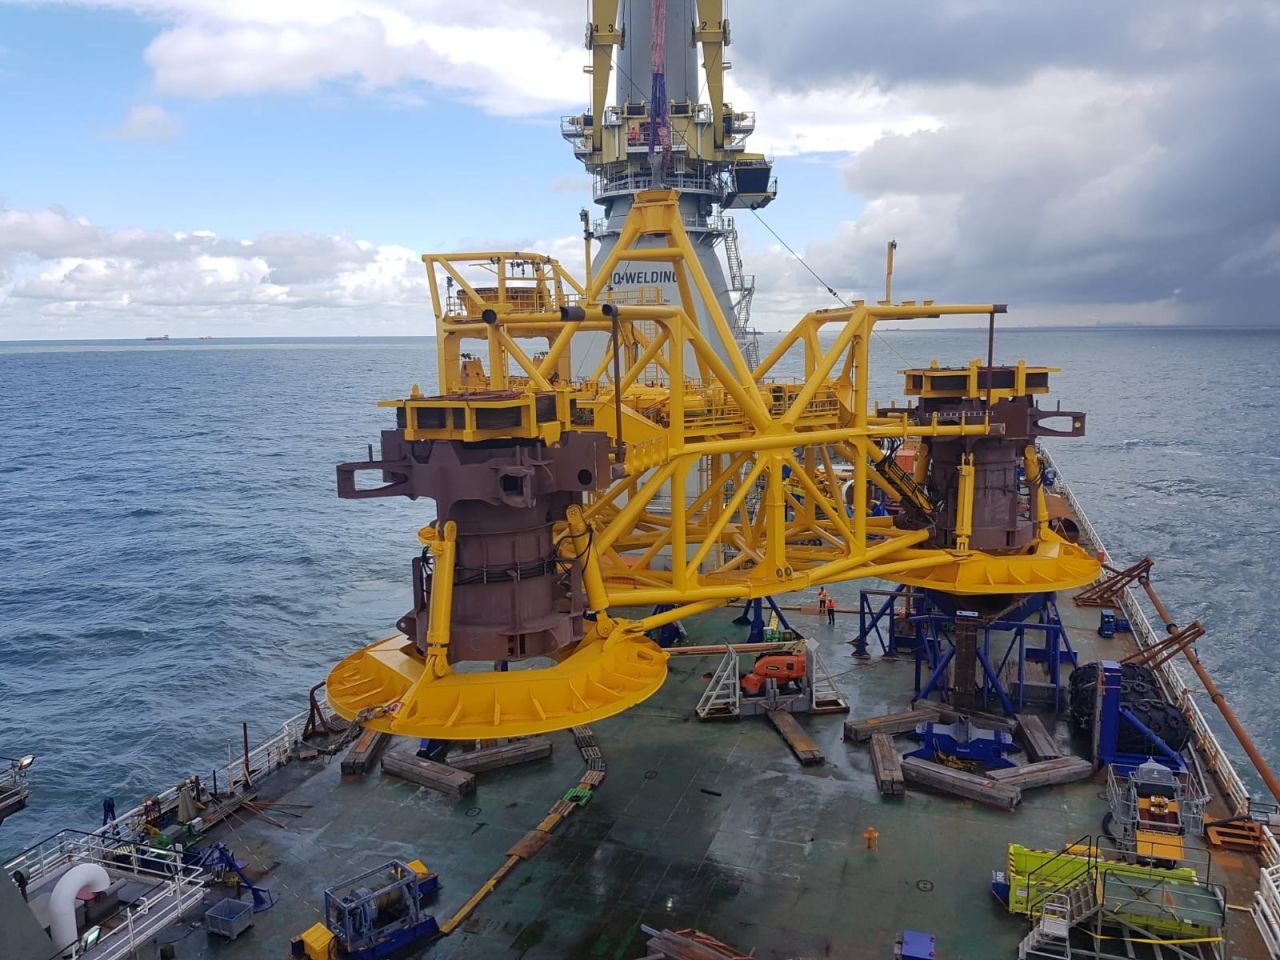 Bokalift 1 at sea equipped for drilling tests at Saint-Brieuc offshore wind farm